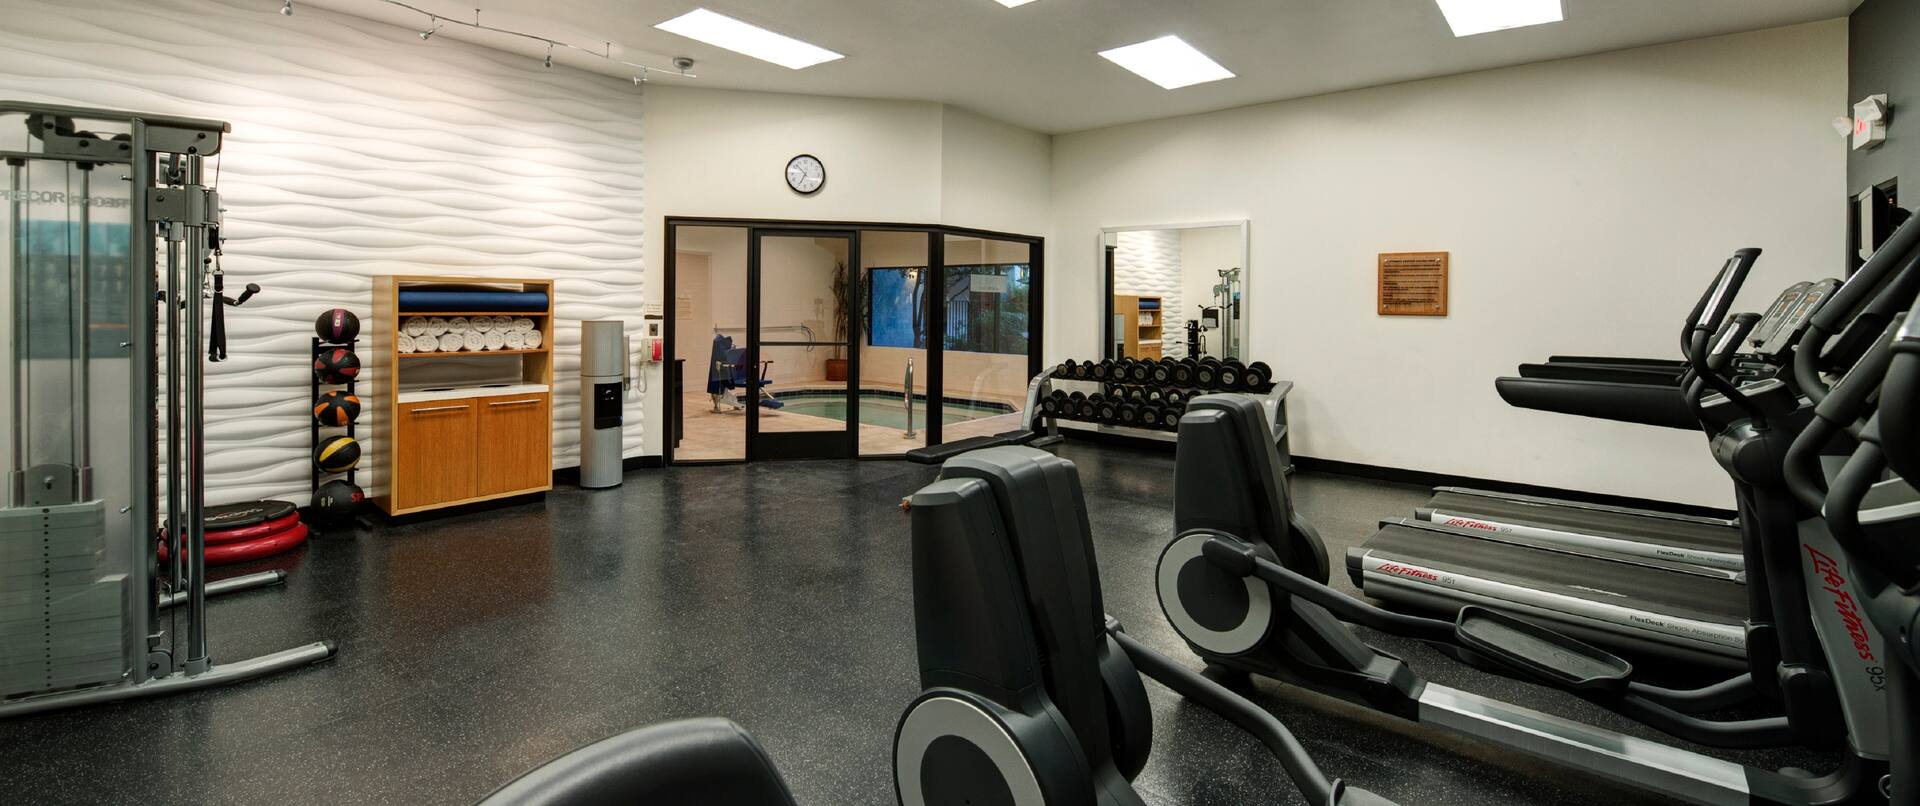 Fitness Center With Cardio Equipment, Weight Machine, Exercise Stepper, Weight Balls, Towel Station, Water Cooler, Wall Clock Above Glass Door With View of Hot Tub, and Large Mirror by Free Weight